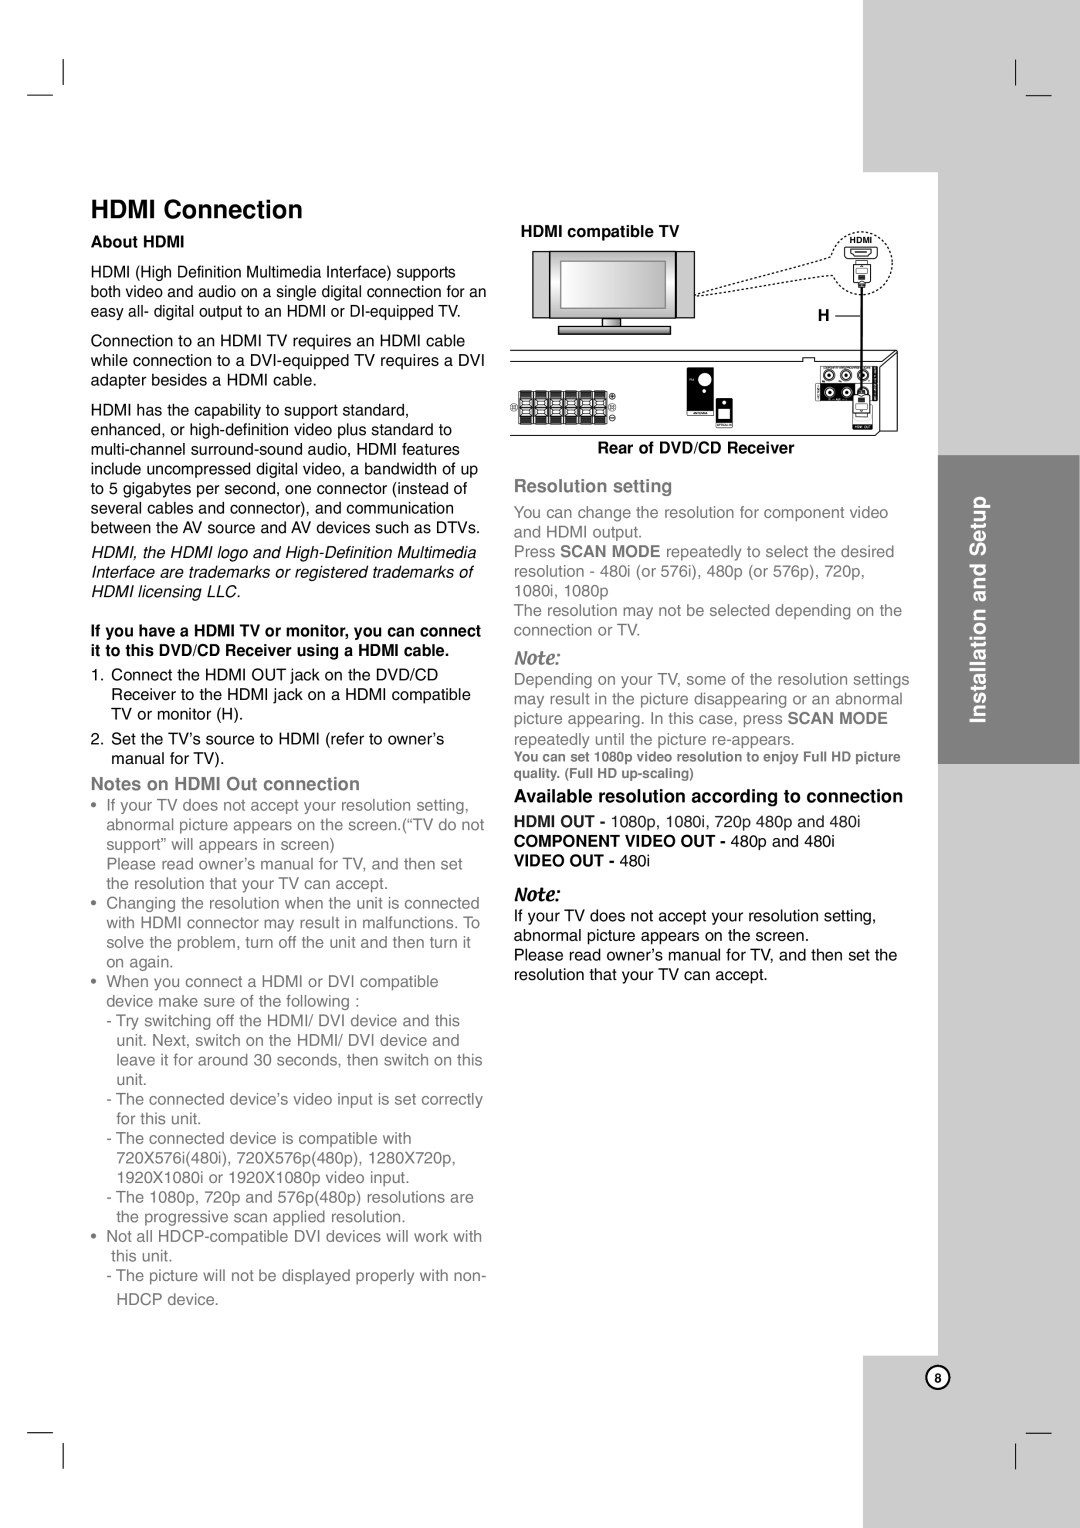 JVC THG31, TH-G31 manual HDMI Connection, Installation and Setup, Available resolution according to connection, About HDMI 